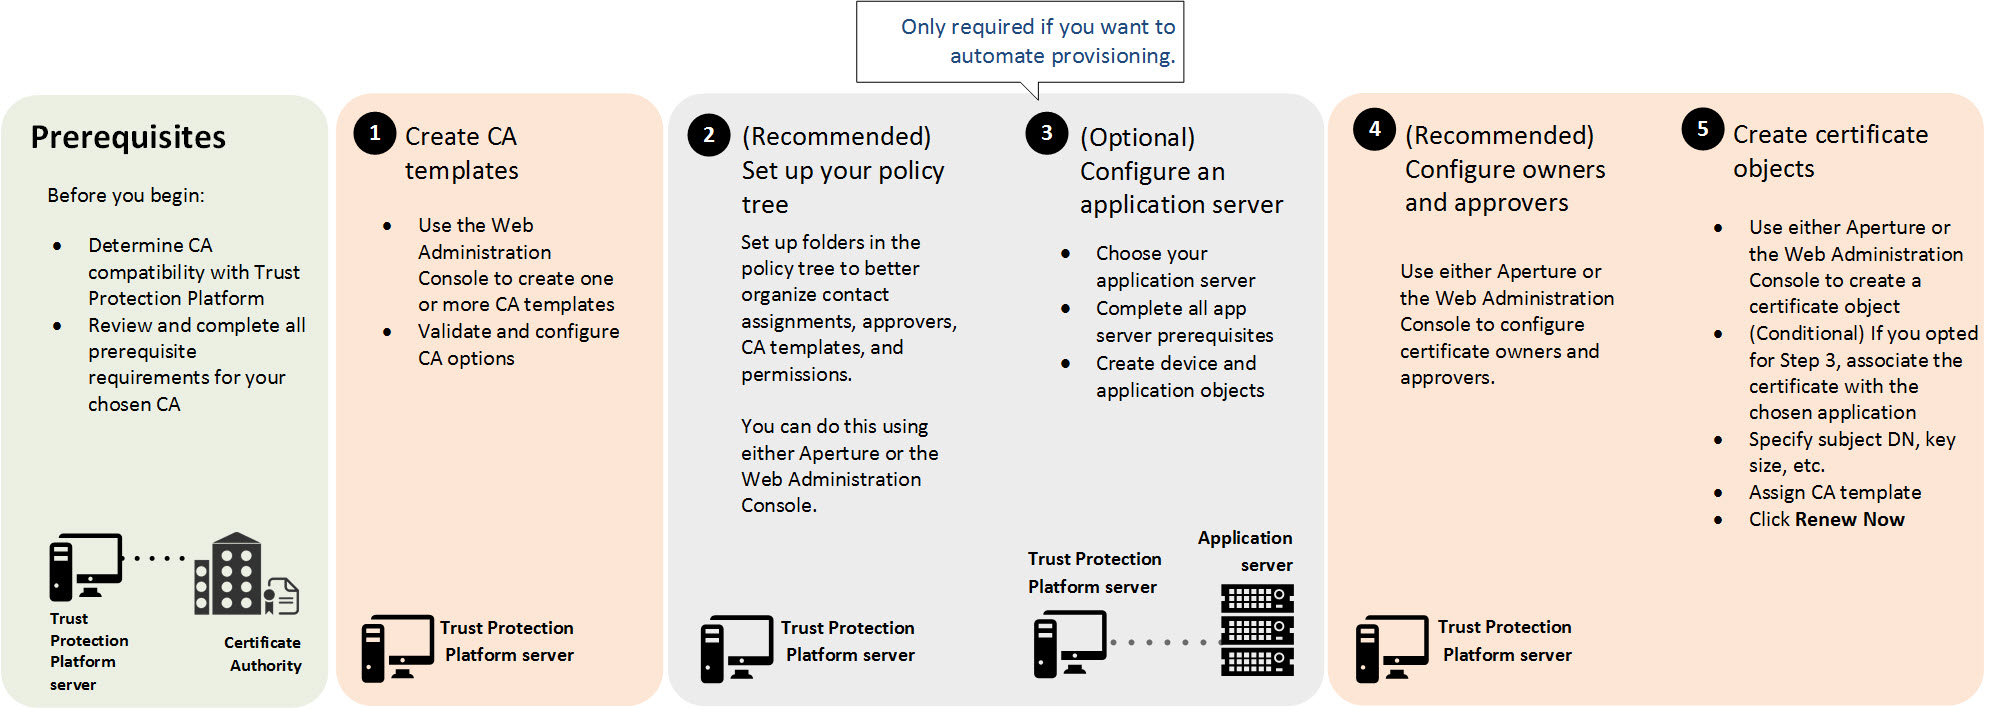 Steps to automate certificate enrollment and provisioning using Venafi CA drivers